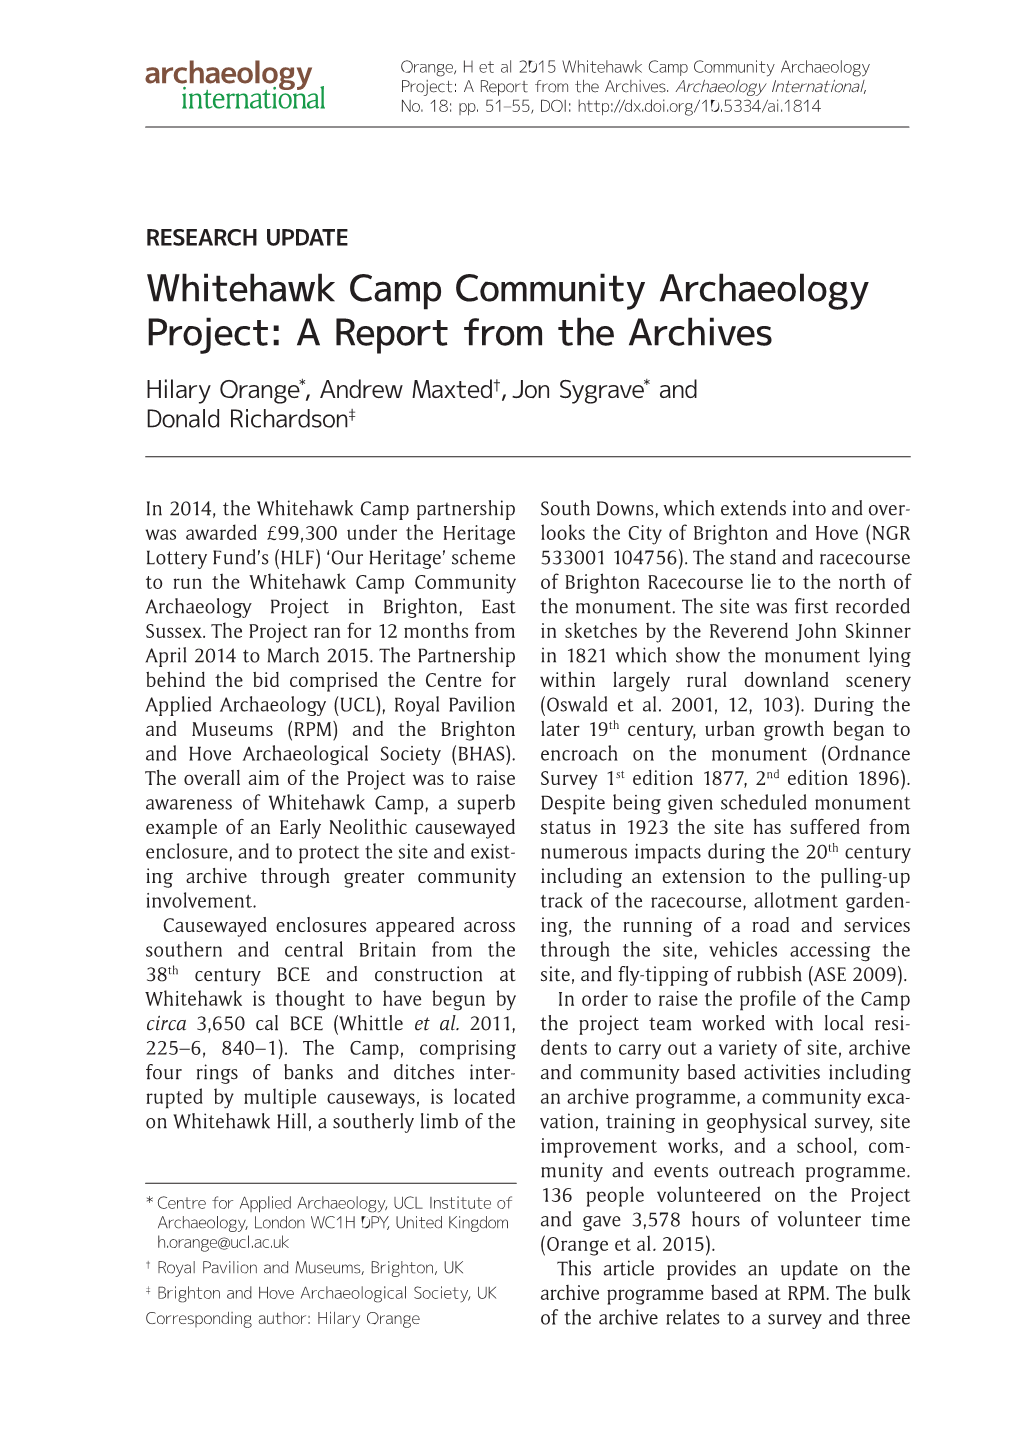 Whitehawk Camp Community Archaeology Project: a Report from the Archives